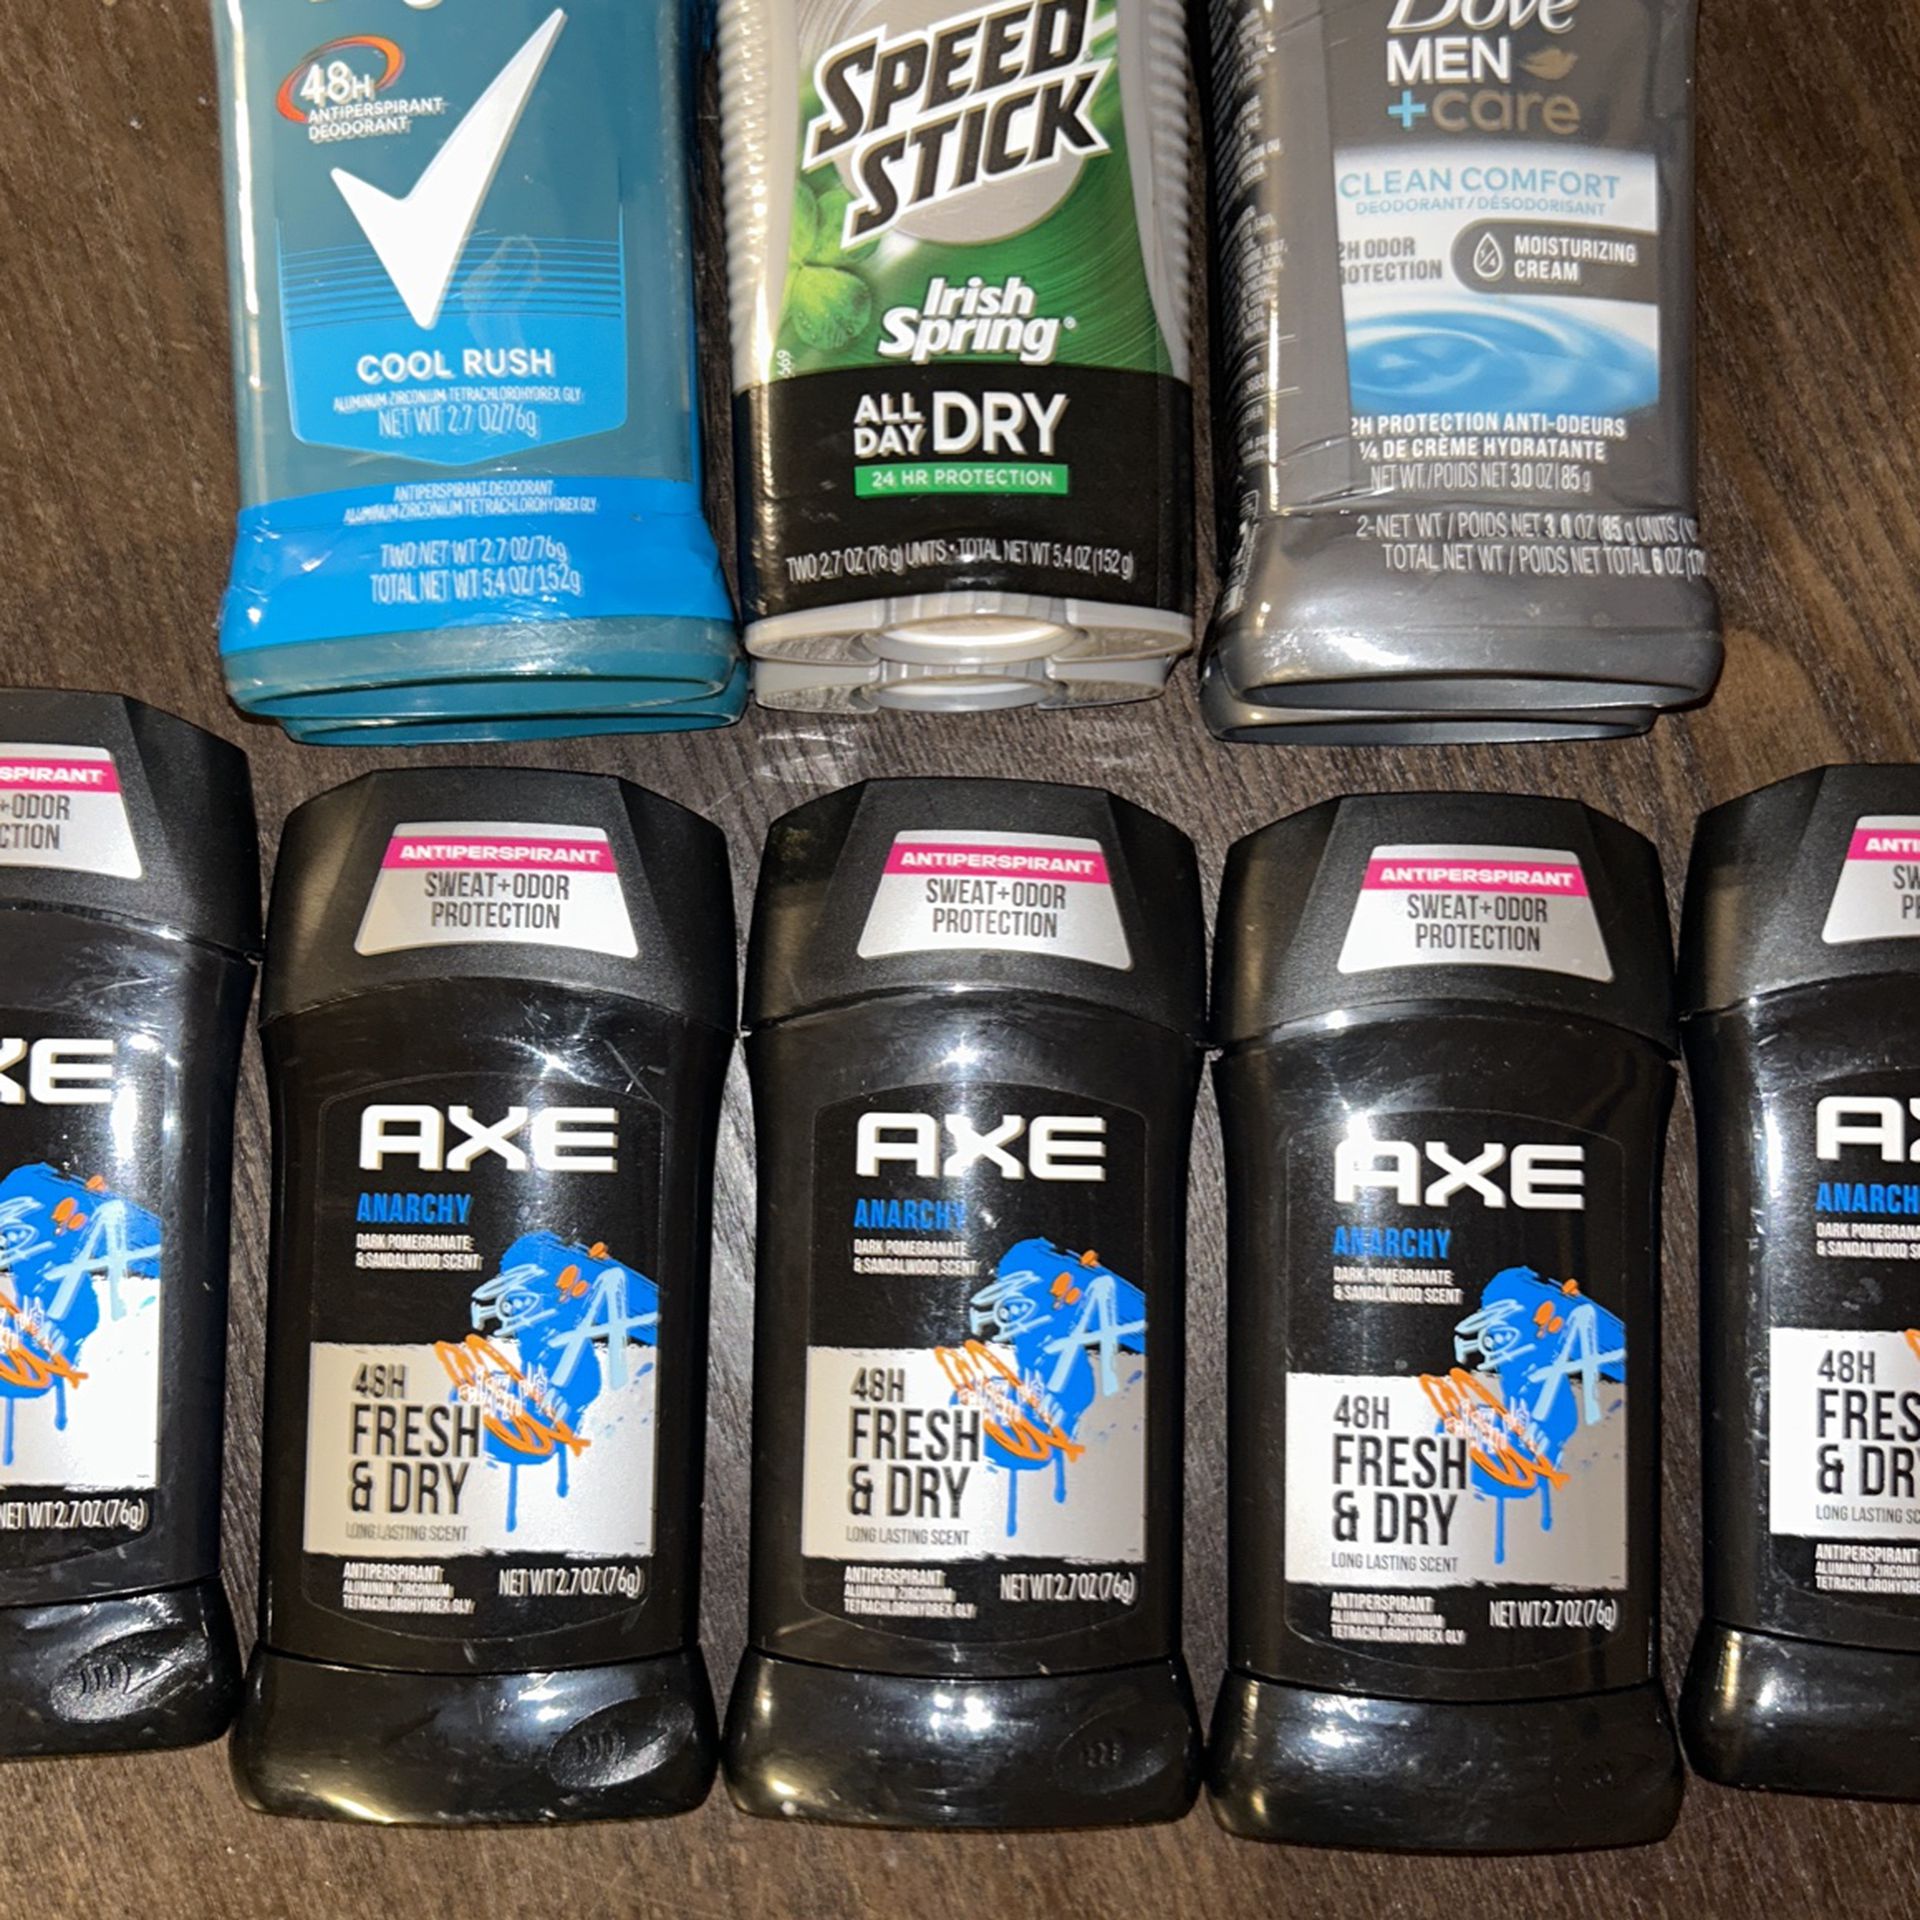 LOT OF 11 BRAND NEW NEVER USED MENS DEODORANT 